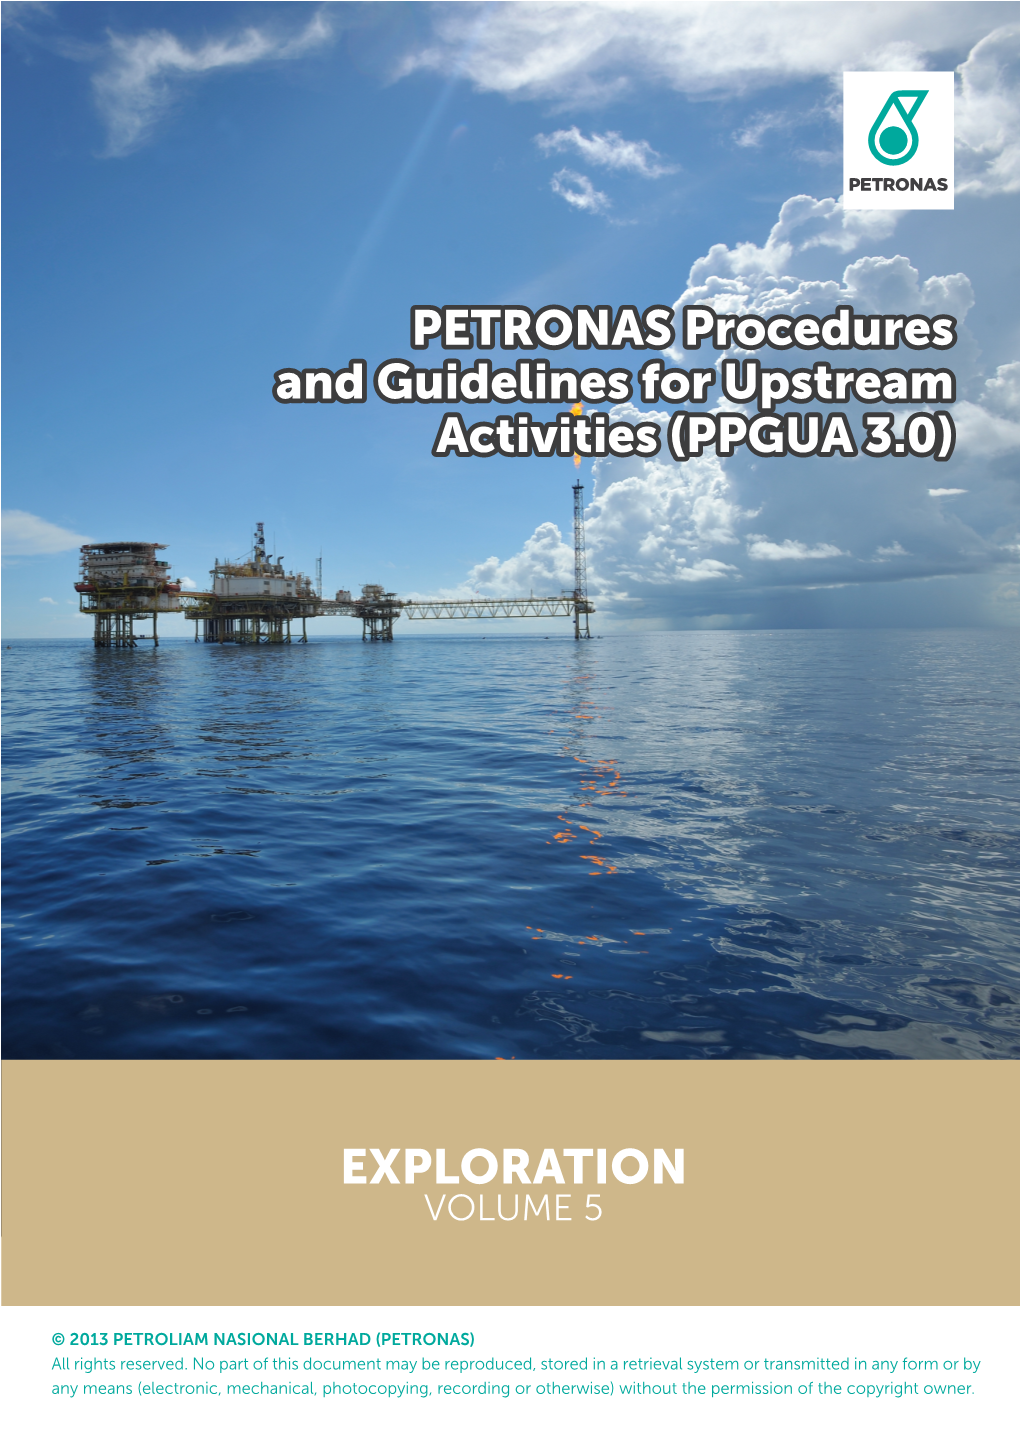 PETRONAS Procedures and Guidelines for Upstream Activities (PPGUA 3.0)